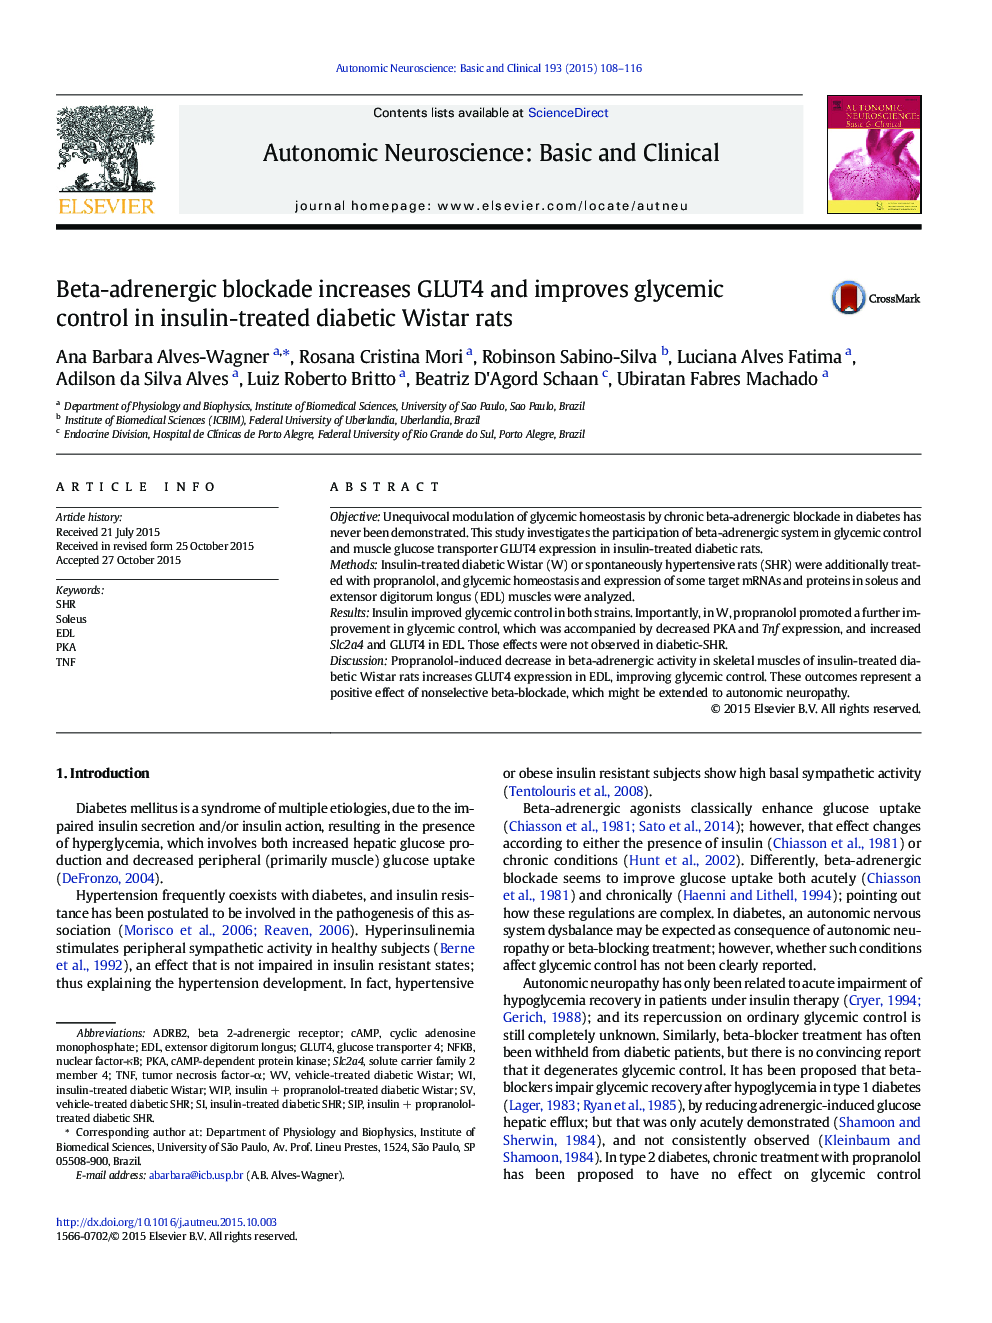 Beta-adrenergic blockade increases GLUT4 and improves glycemic control in insulin-treated diabetic Wistar rats